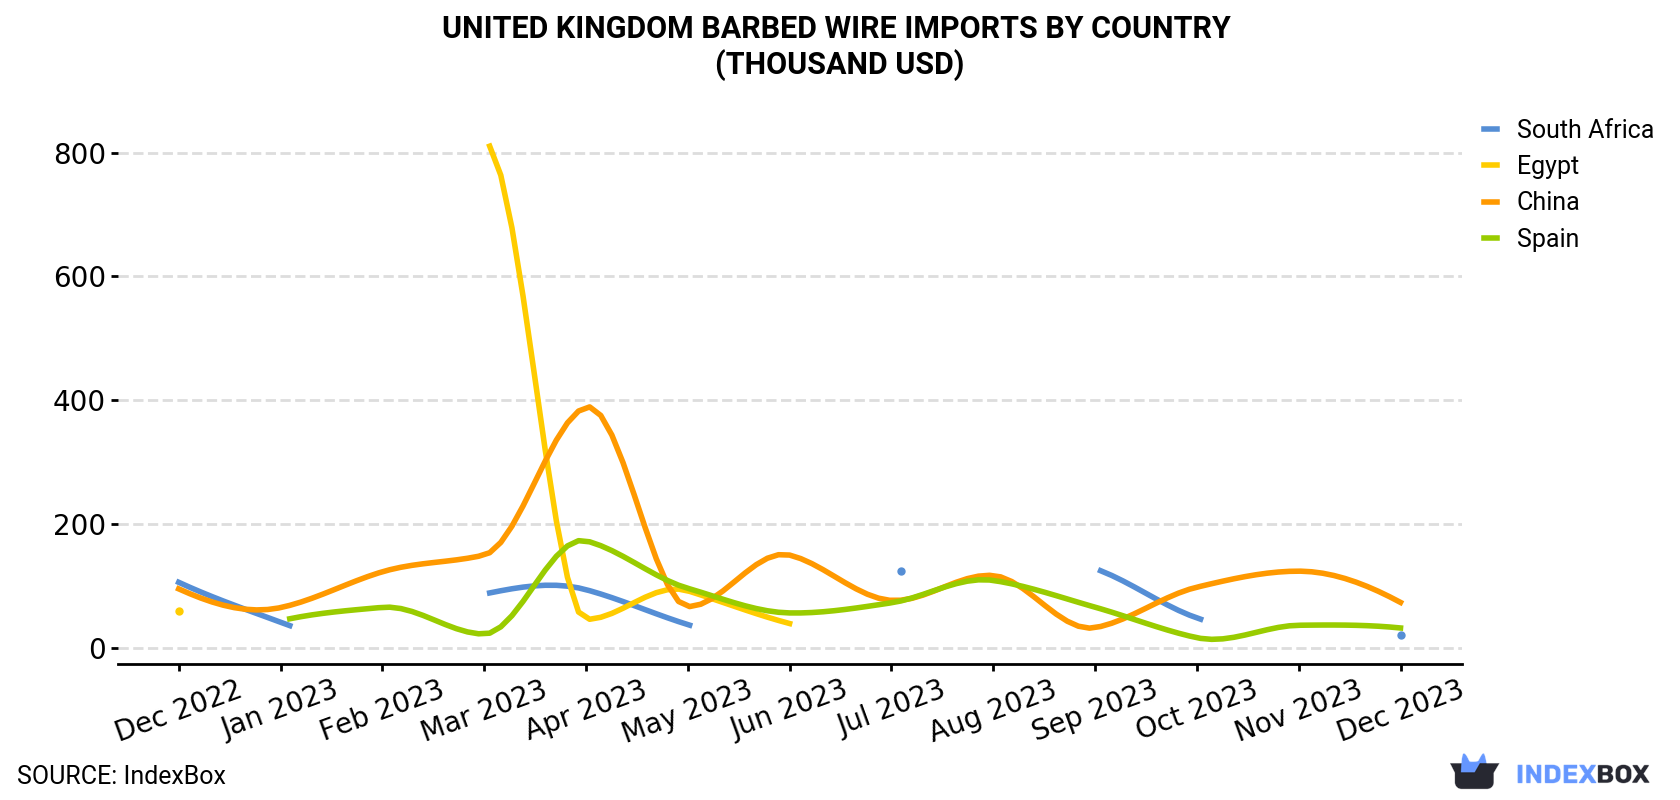 United Kingdom Barbed Wire Imports By Country (Thousand USD)